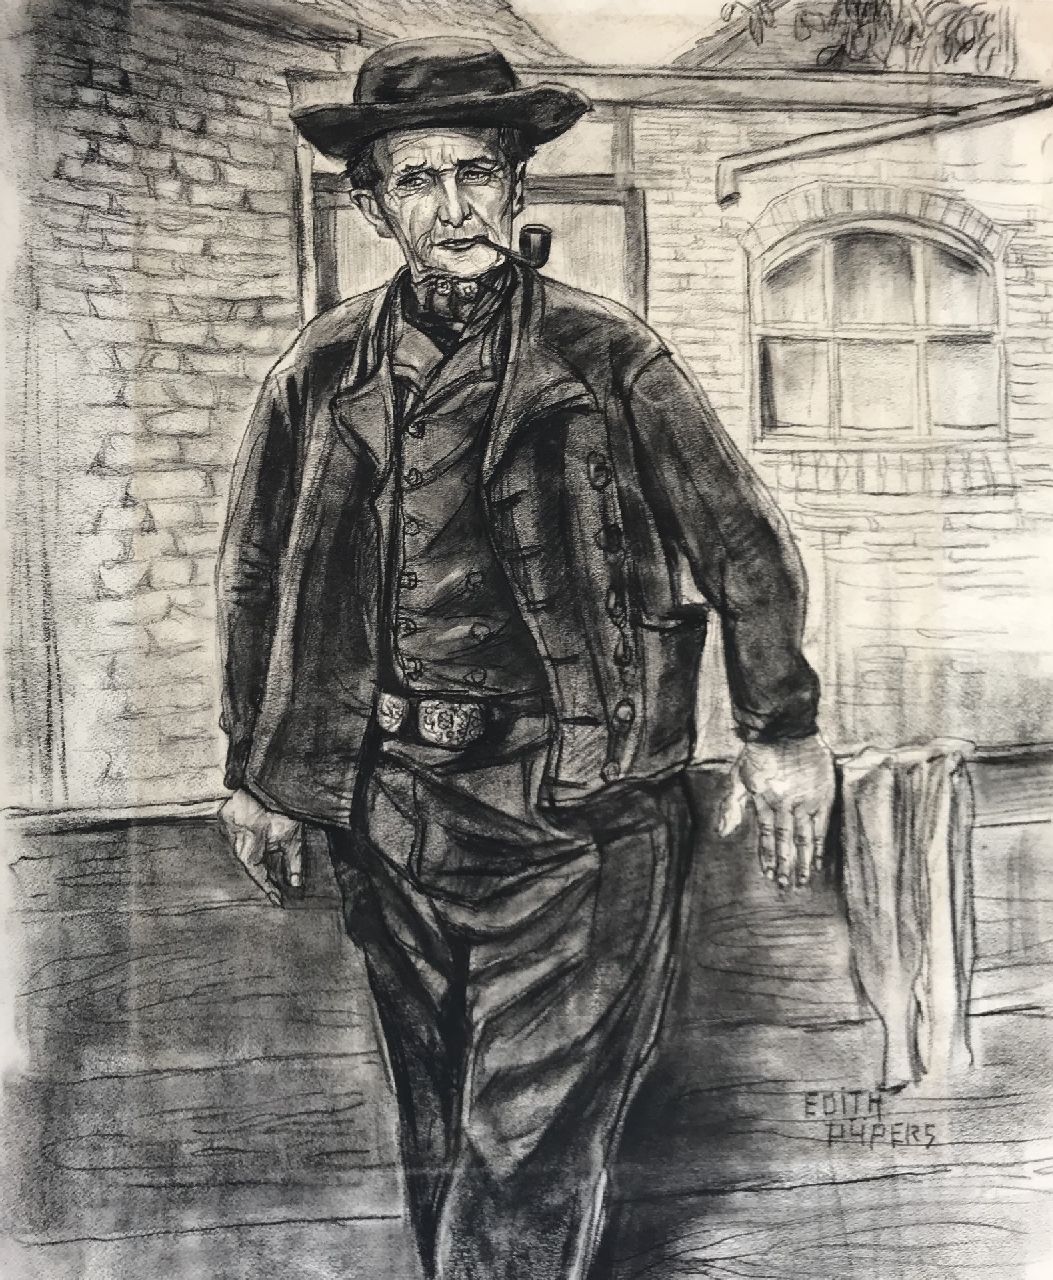 Pijpers E.E.  | 'Edith' Elizabeth Pijpers | Watercolours and drawings offered for sale | Portrait of a farmer, charcoal on paper 60.2 x 49.9 cm, signed l.r.